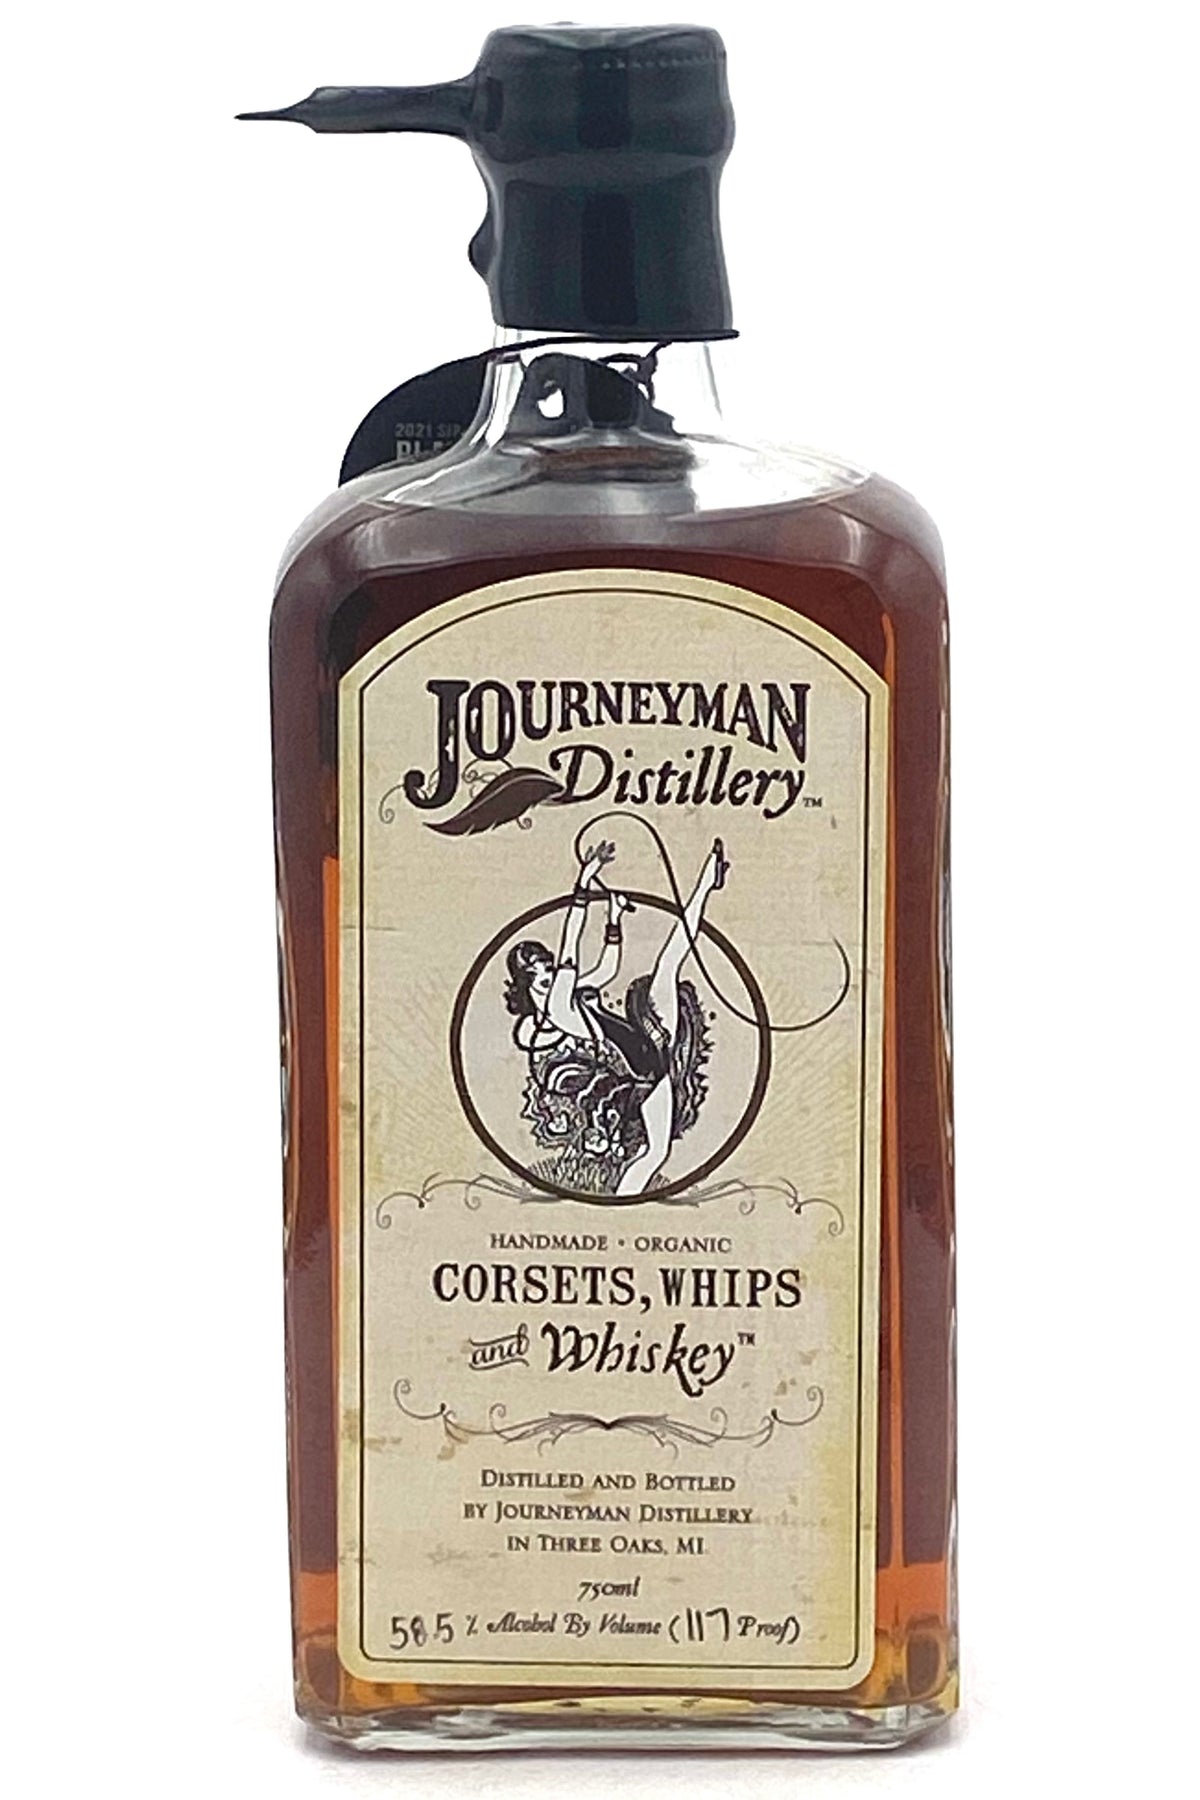 Journeyman Distillery Corsets, Whips, and Whiskey Cask Strength Wheat Whiskey